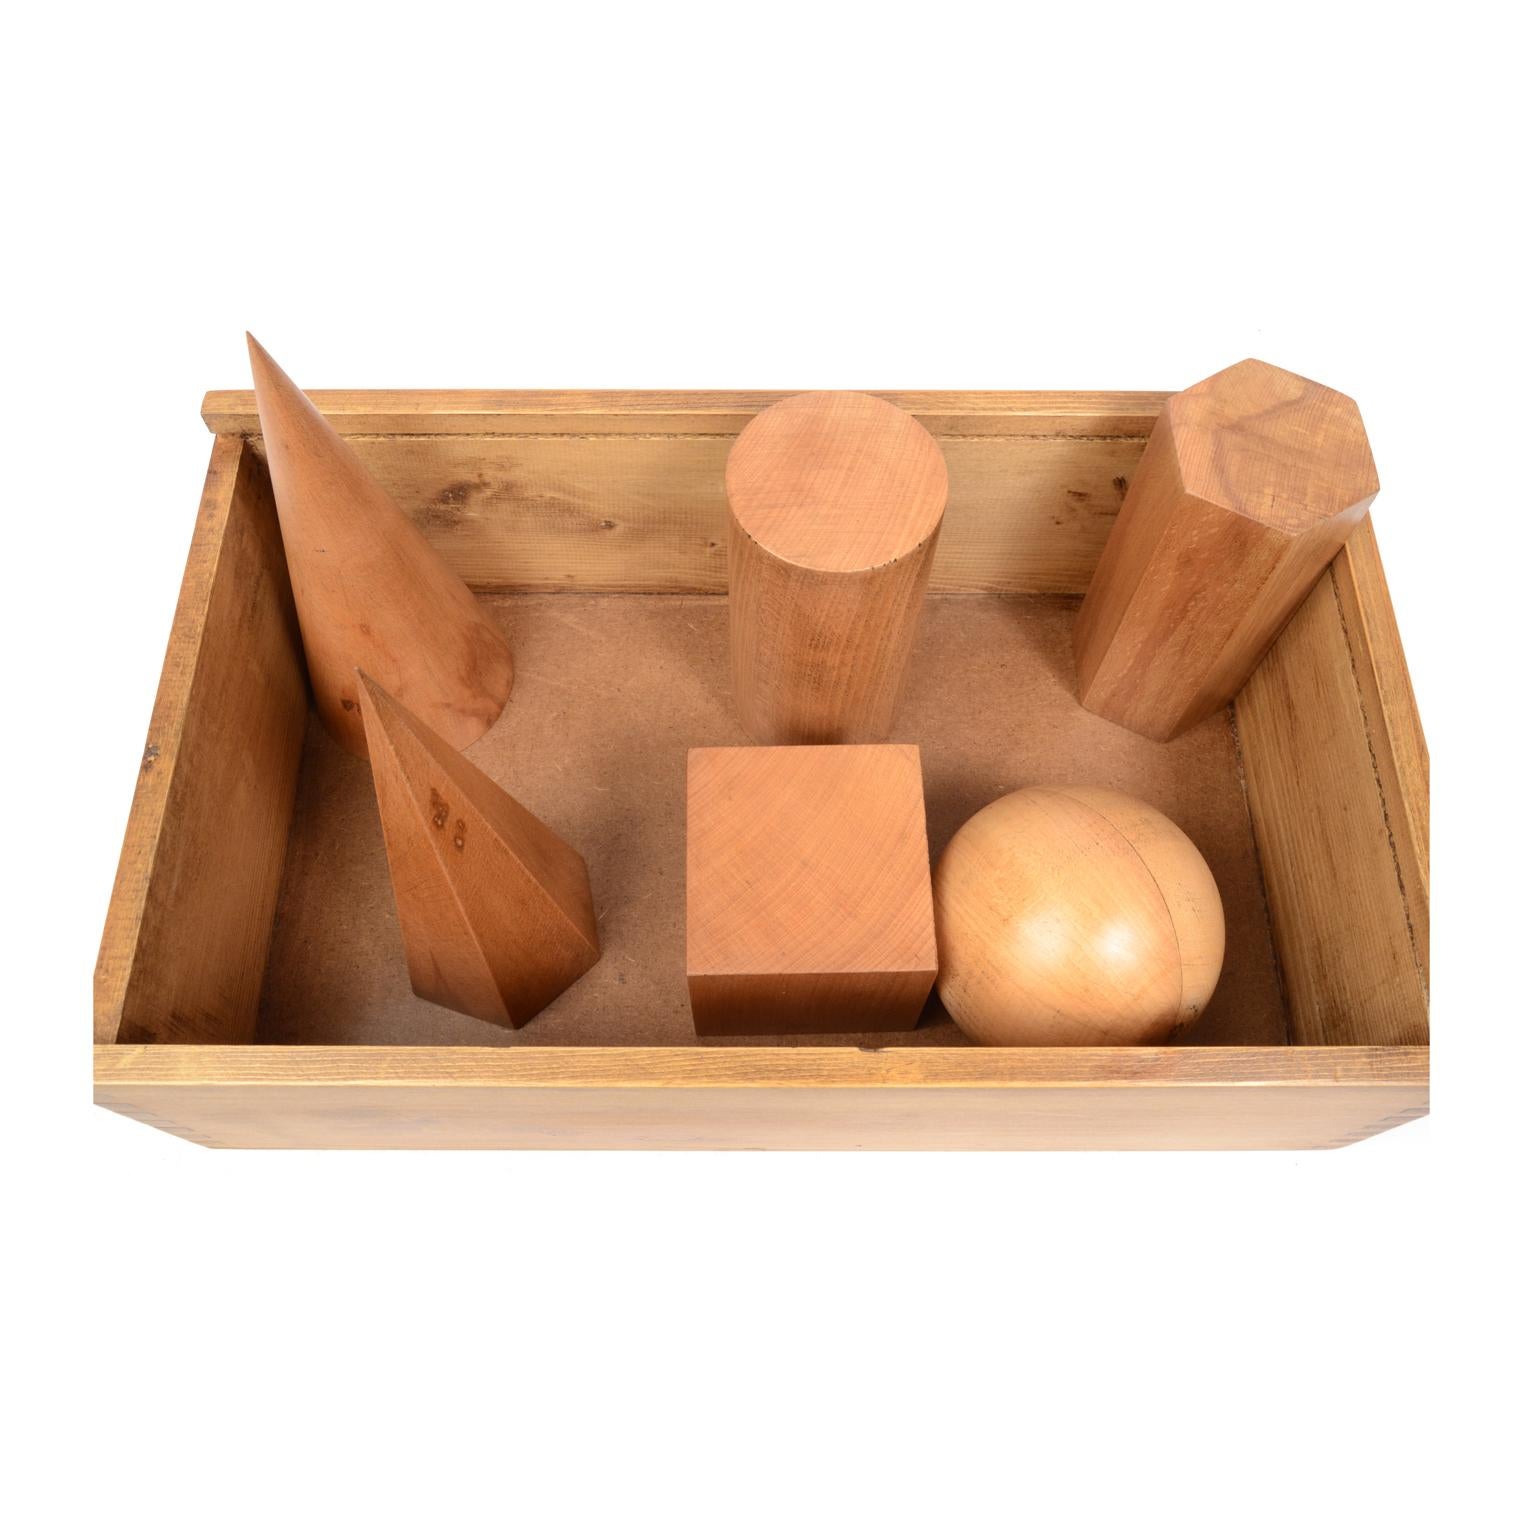 Box containing 6 dismounplate geometric solids of oak wood, height 20 cm, in their original wooden box complete with illustrative leaflet for calculating surfaces and volumes. Made for educational purposes for schools by Antonio Vallardi publisher